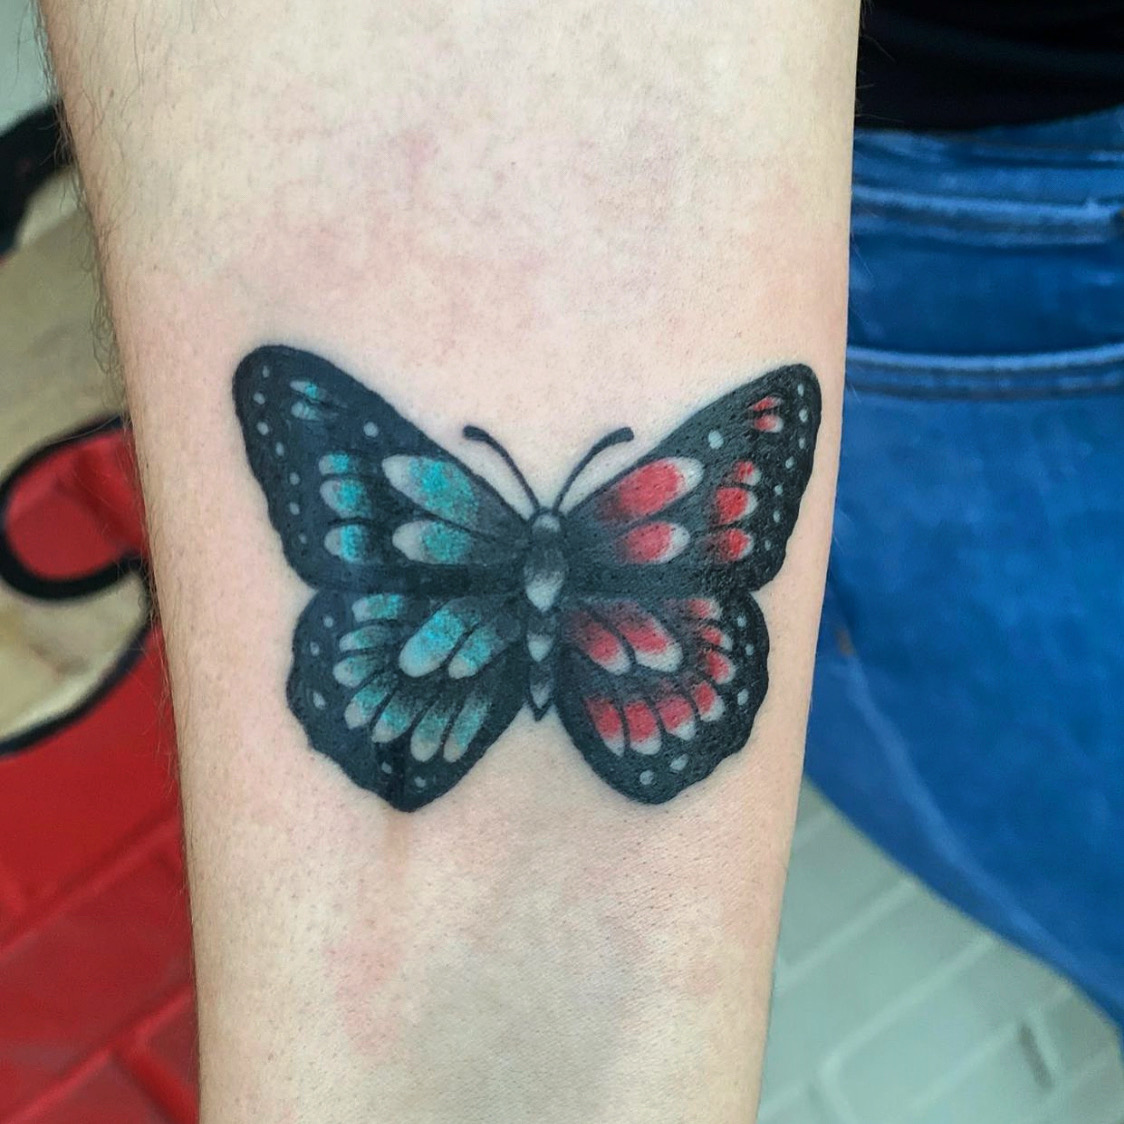 Tattoo of a butterfly from best tattoo shops in dfw